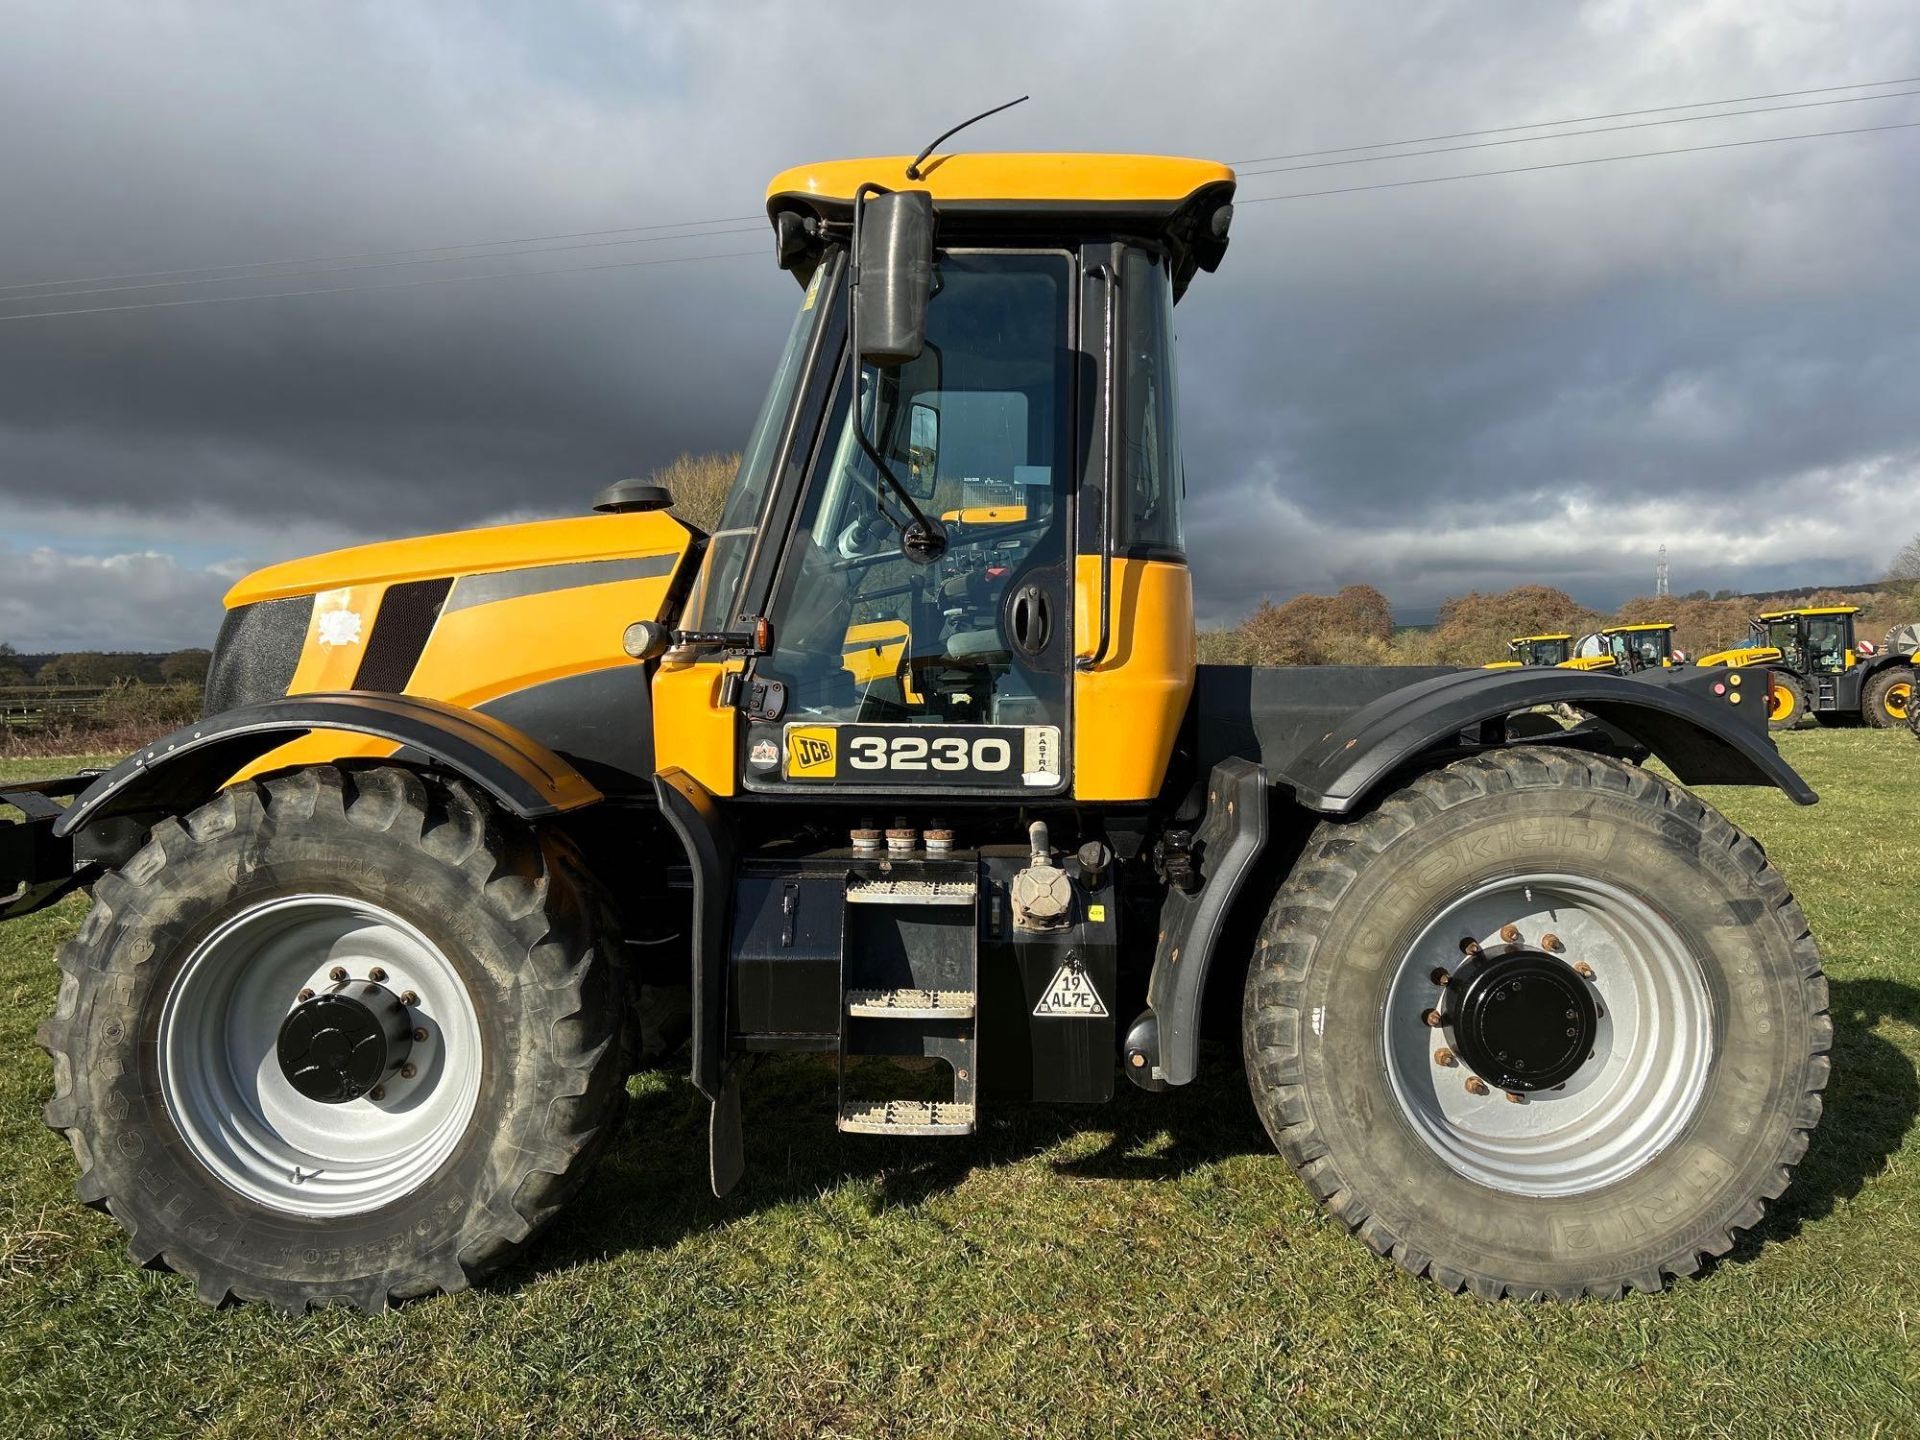 2009 JCB Fastrac 3230, 65kph, 3 rear spool valves. Datatagged. On Firestone 540/65R30 front and Noki - Image 2 of 13